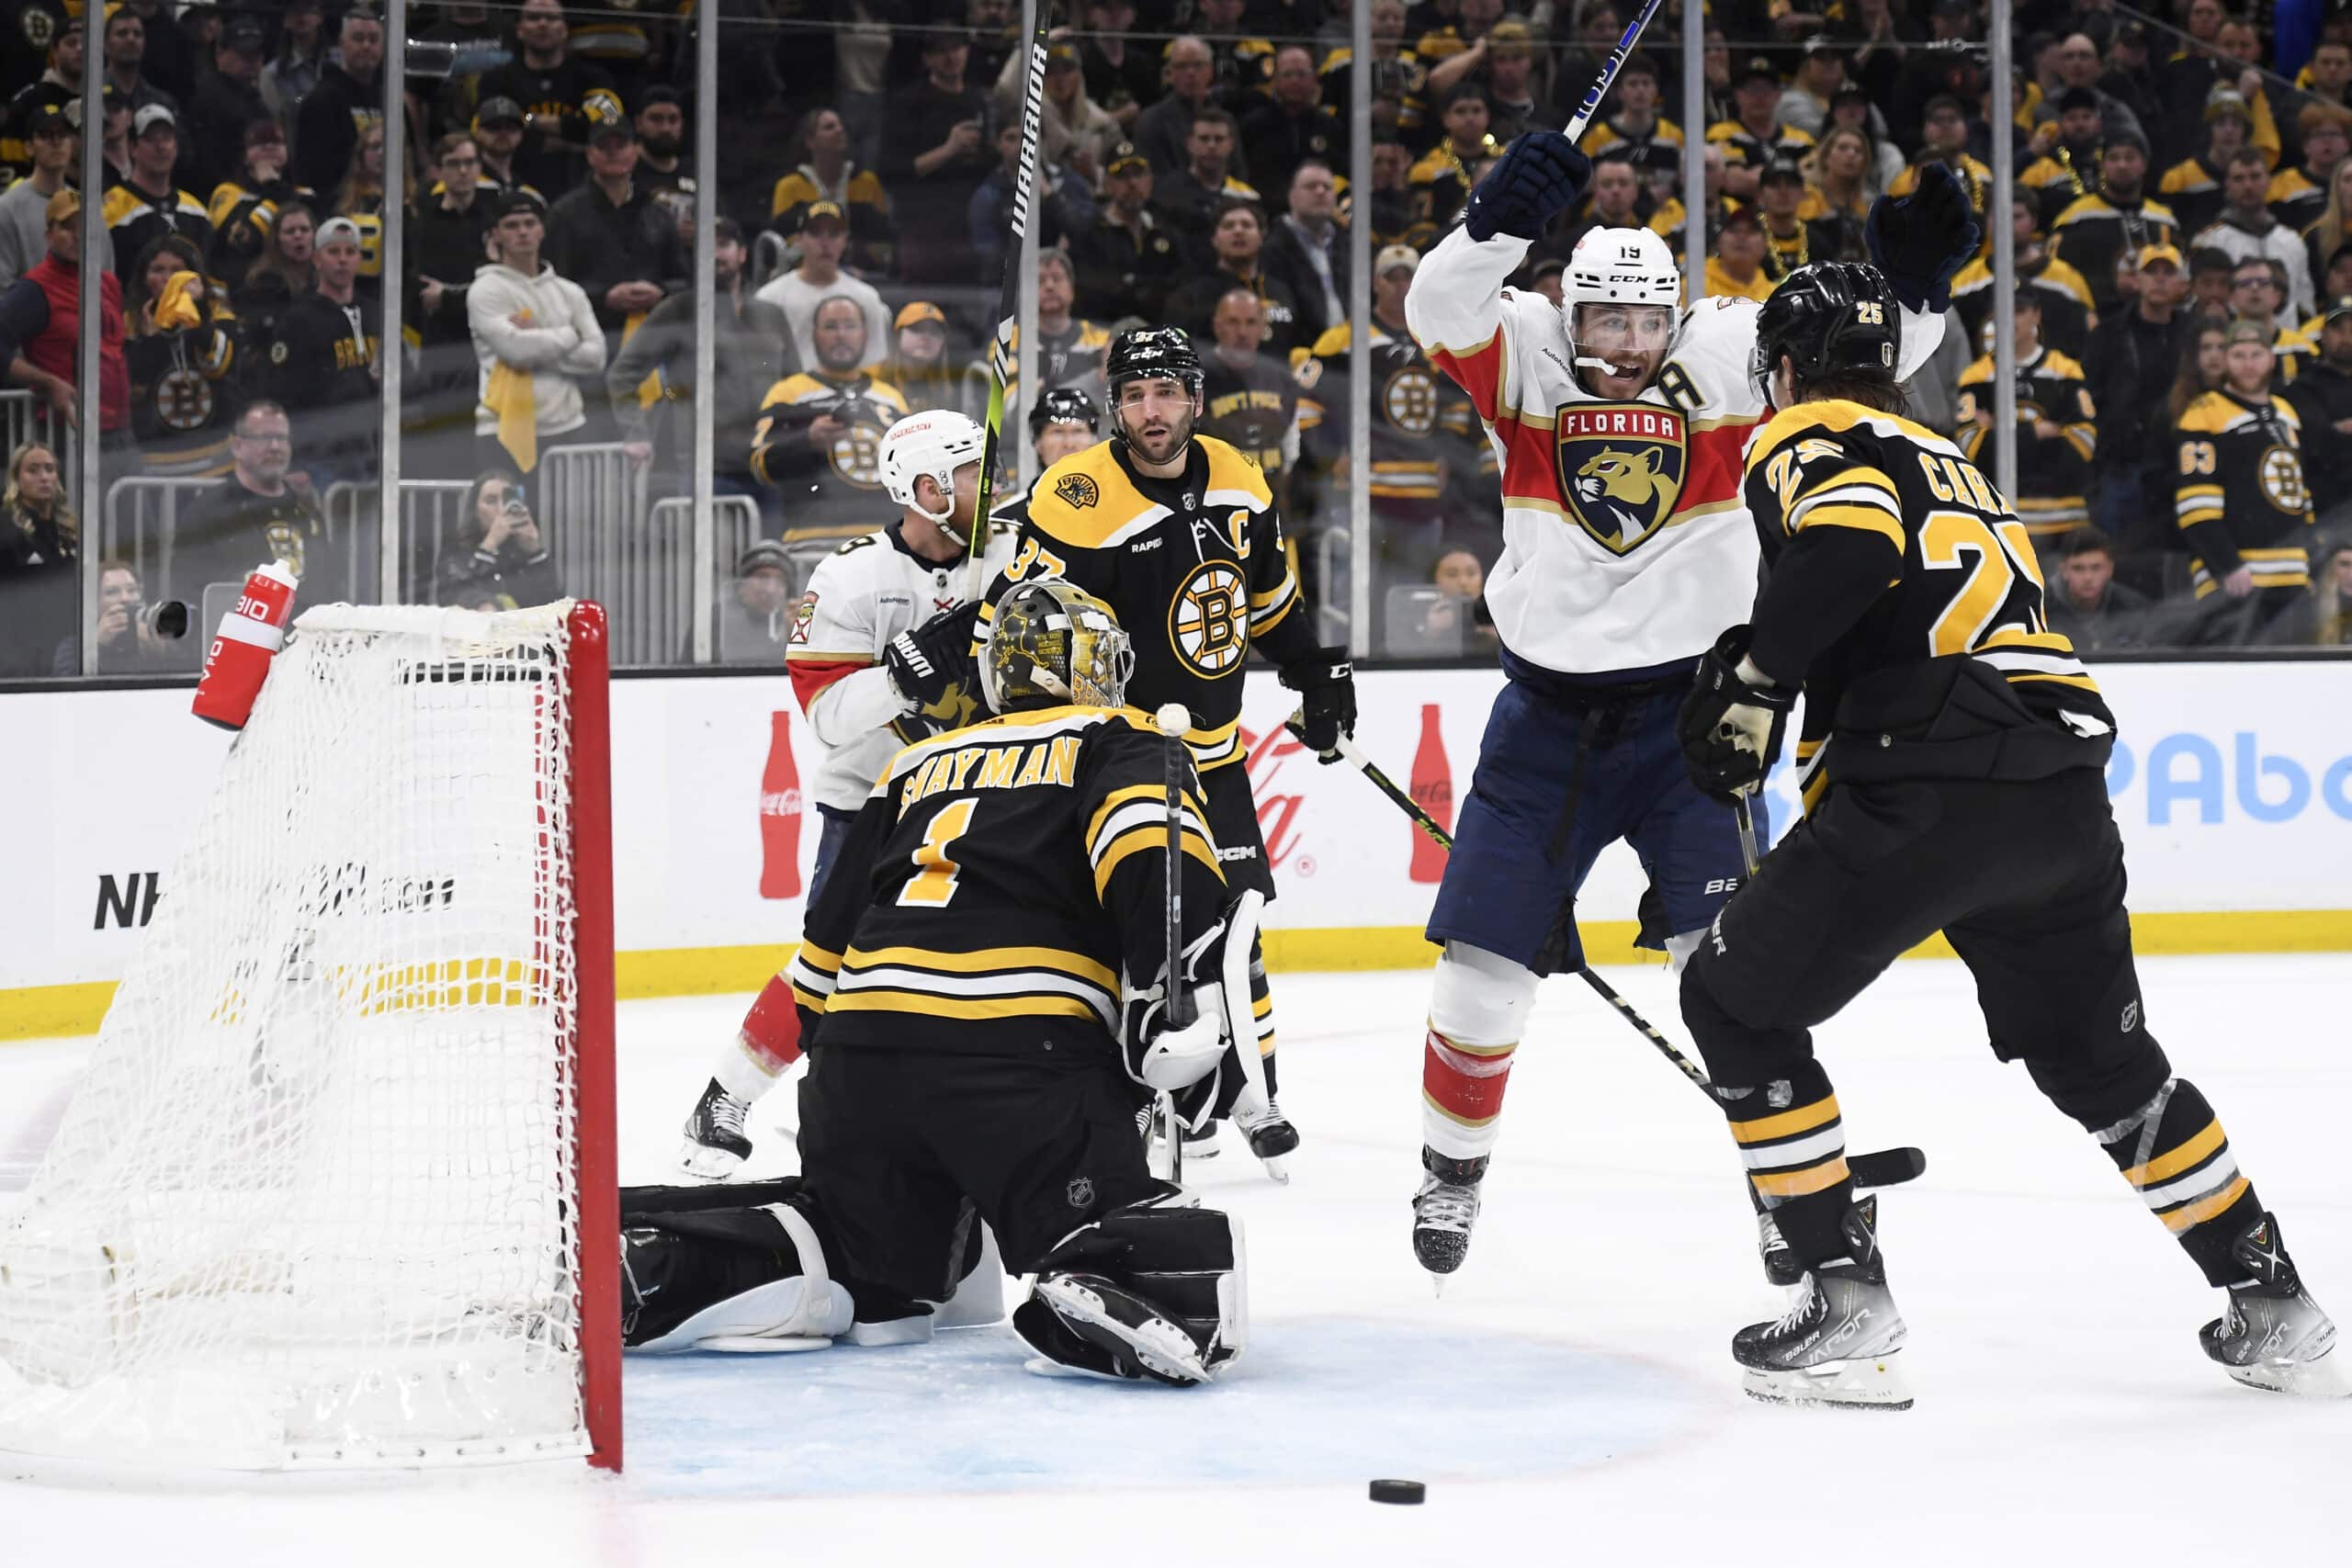 The Panthers Game 7 win over the Bruins set an NHL first-round ratings record.